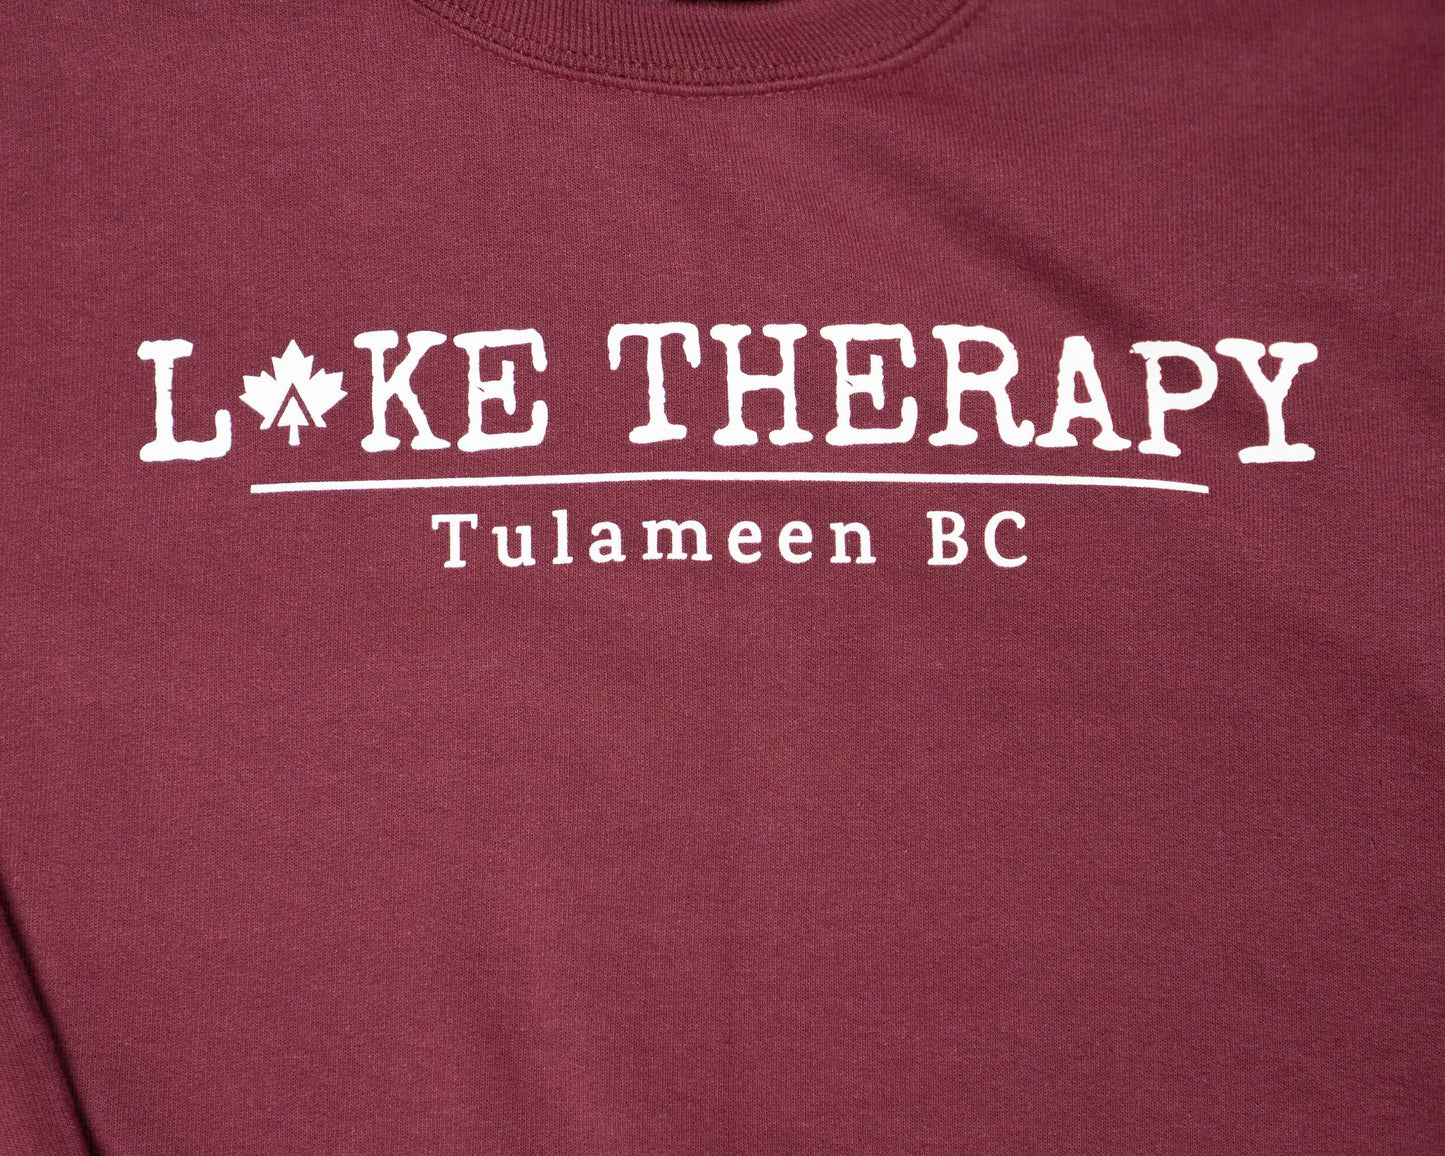 NEW!! Tulameen Crew - Lake Therapy Series - Lake Therapy apparel 